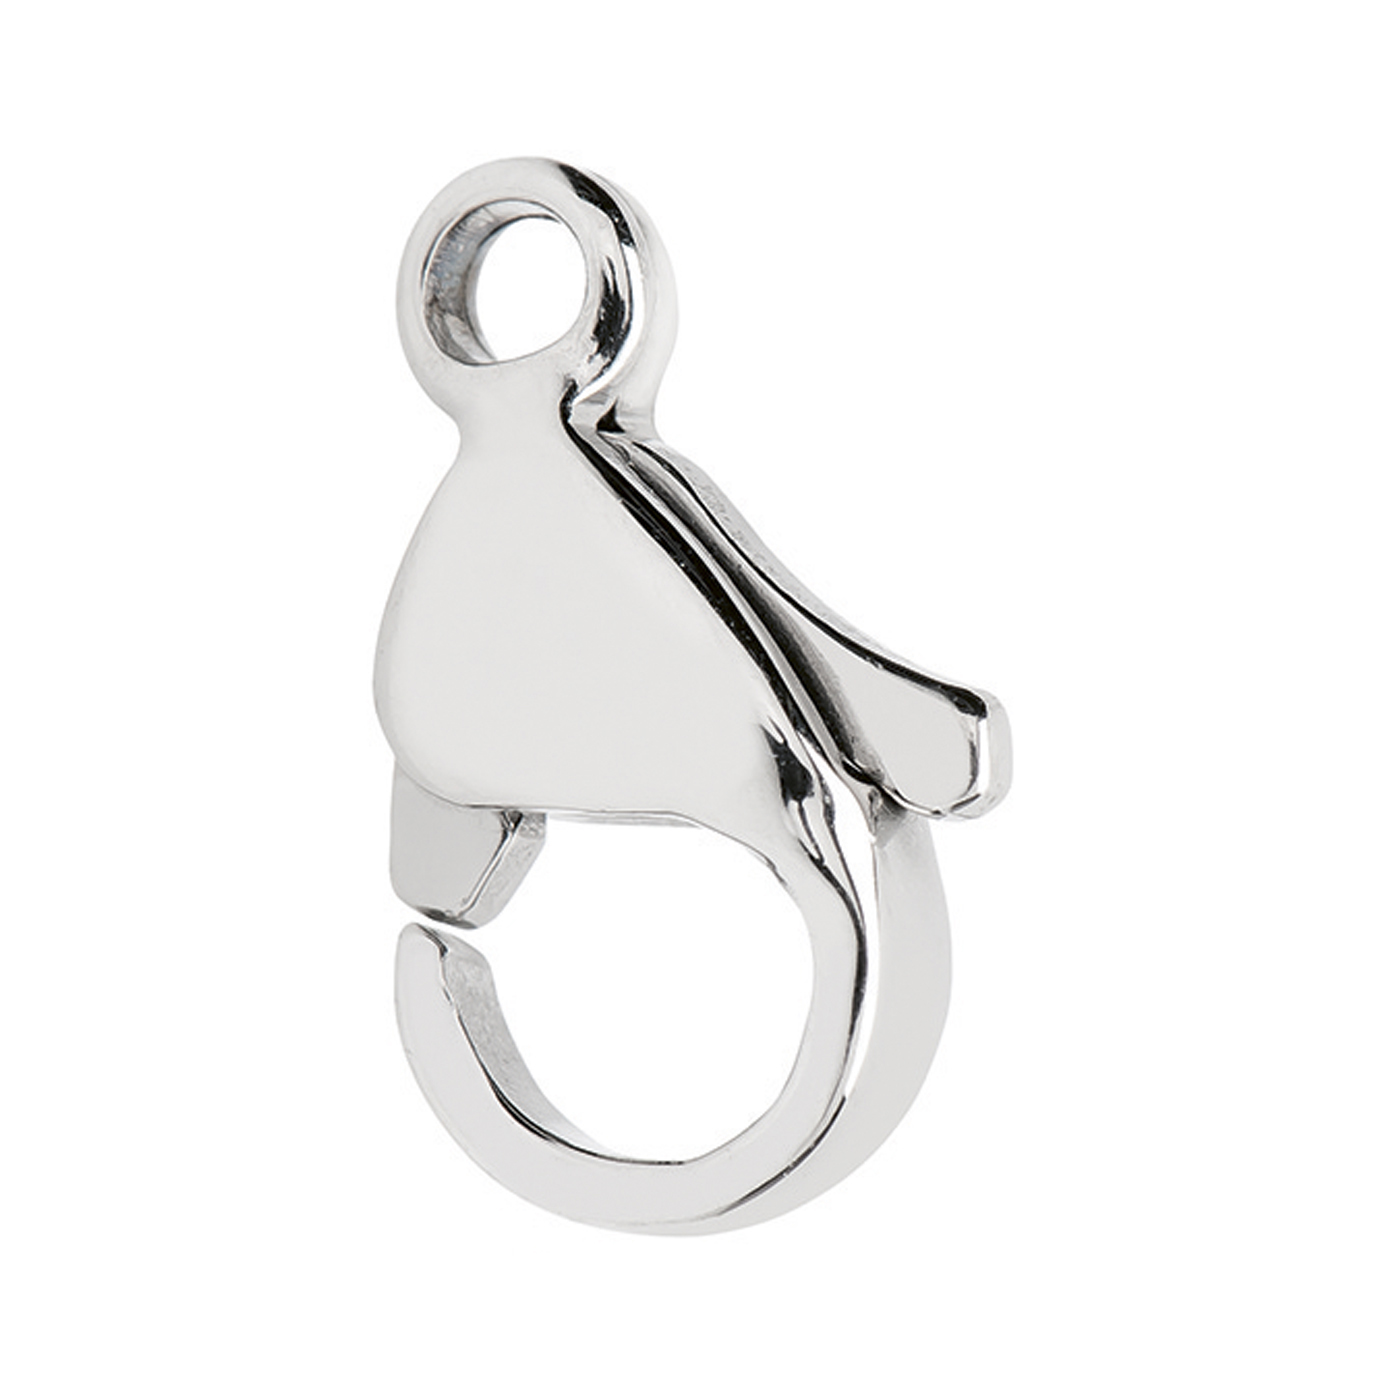 Lobster Clasp, Stainless Steel, 11 mm - 2 pieces